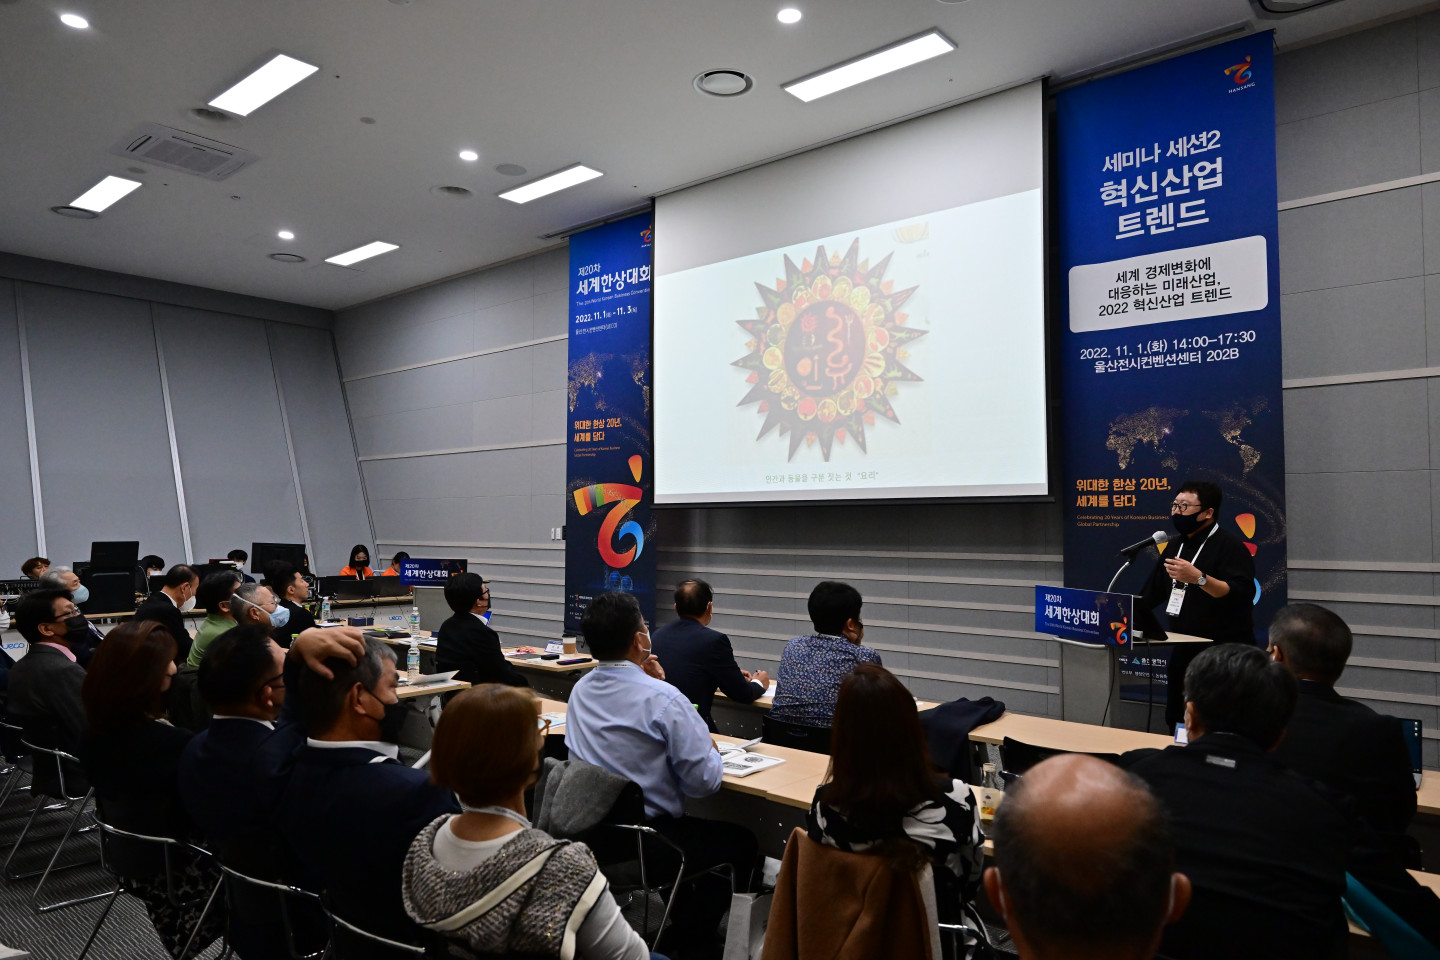 Korean businesspeople who attended the seminar to grasp the world economic trends and reinforce their global capabilities